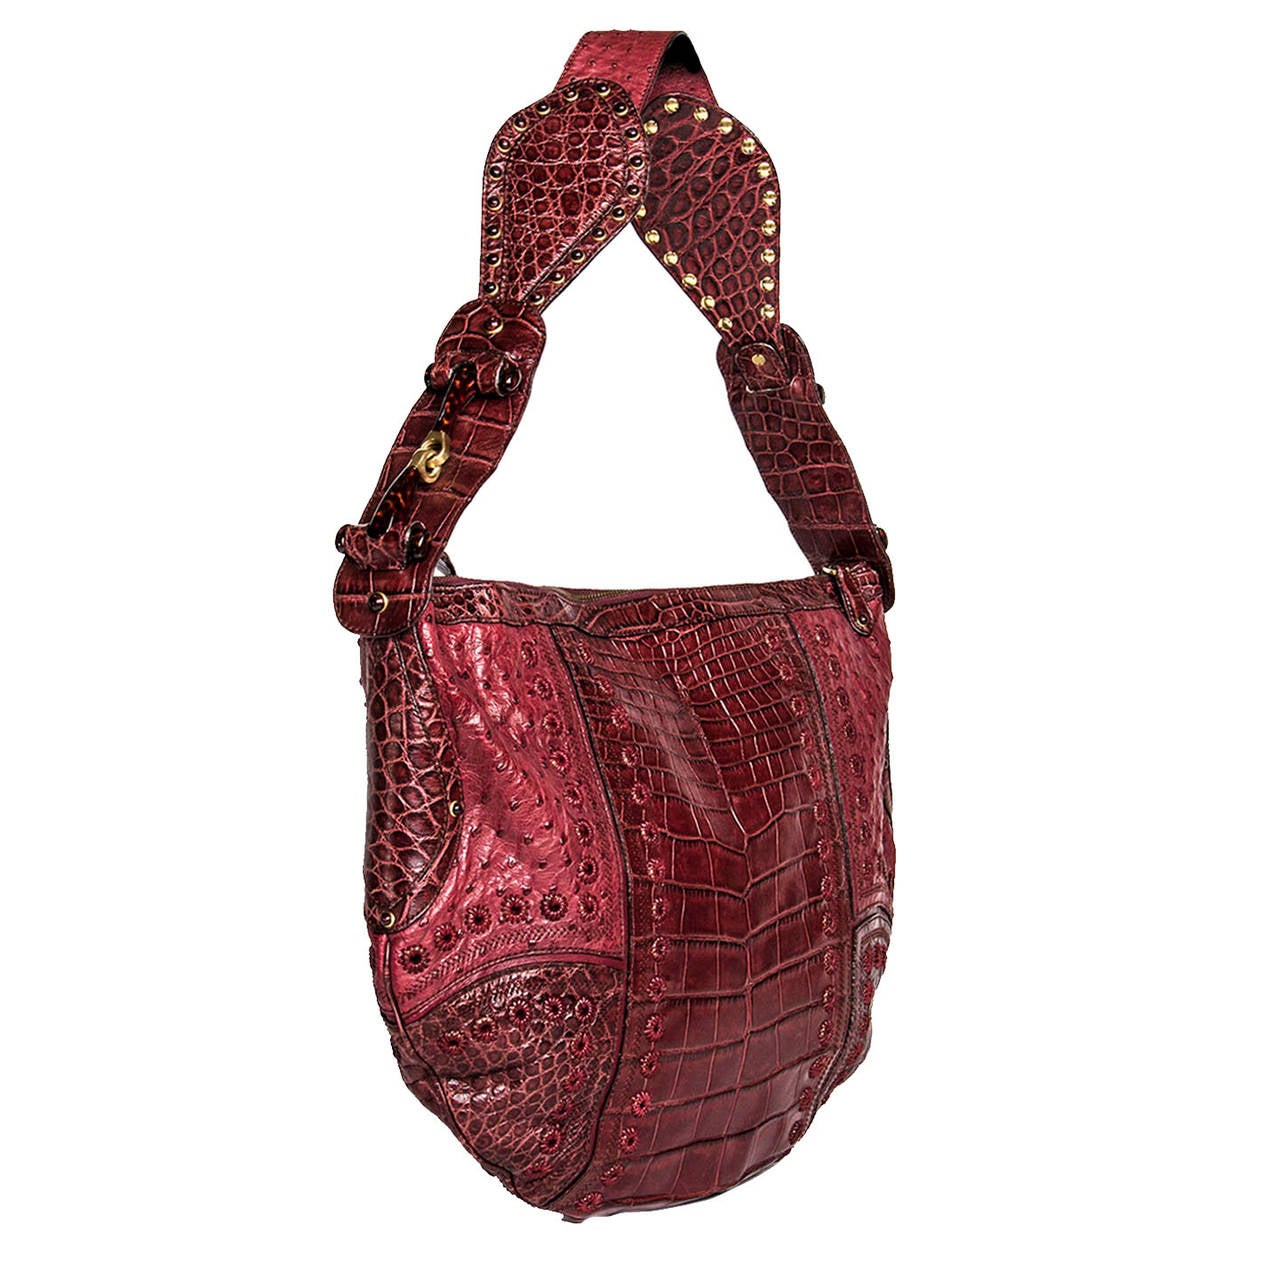 Burgundy shoulder bag made with a stunning crocodile and ostrich patchwork. The bag is adorned by embroidered little holes that follow the patch profiles. The wide shoulder strap has small round studs and is also enriched by a unique jewelry buckle